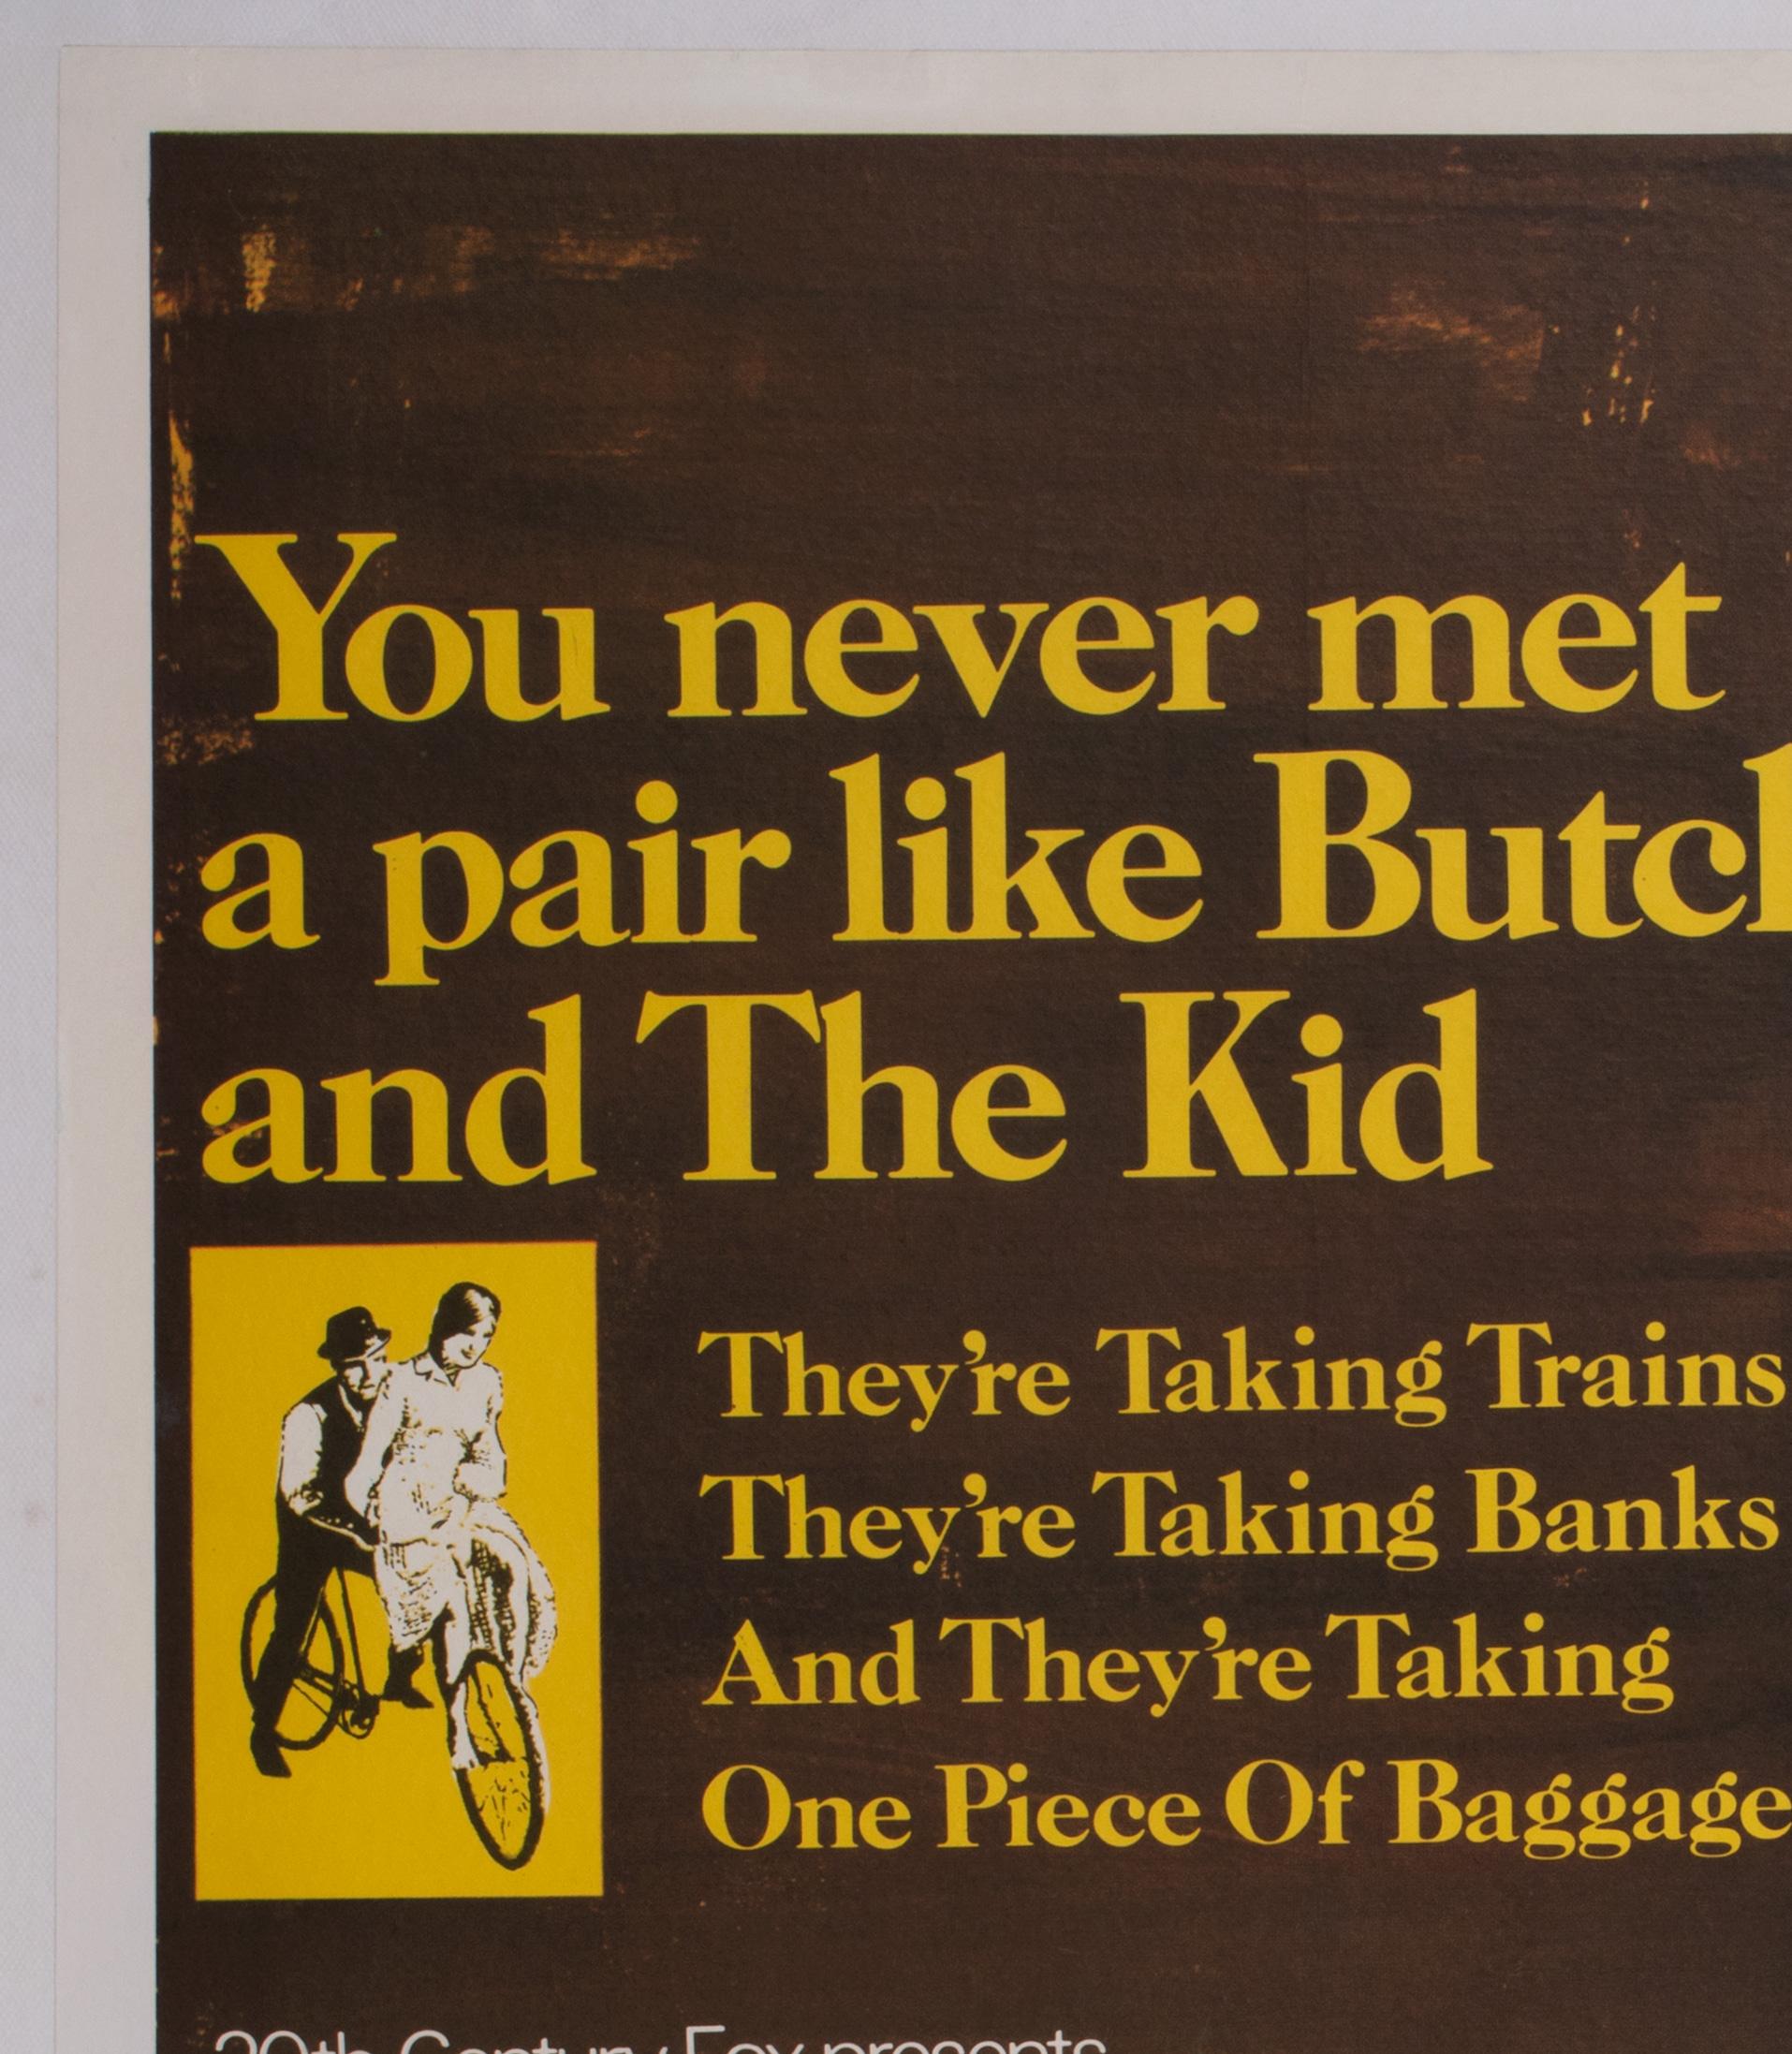 British Butch Cassidy and the Sundance Kid UK Film Movie Poster, Tom Beauvais, 1969 For Sale